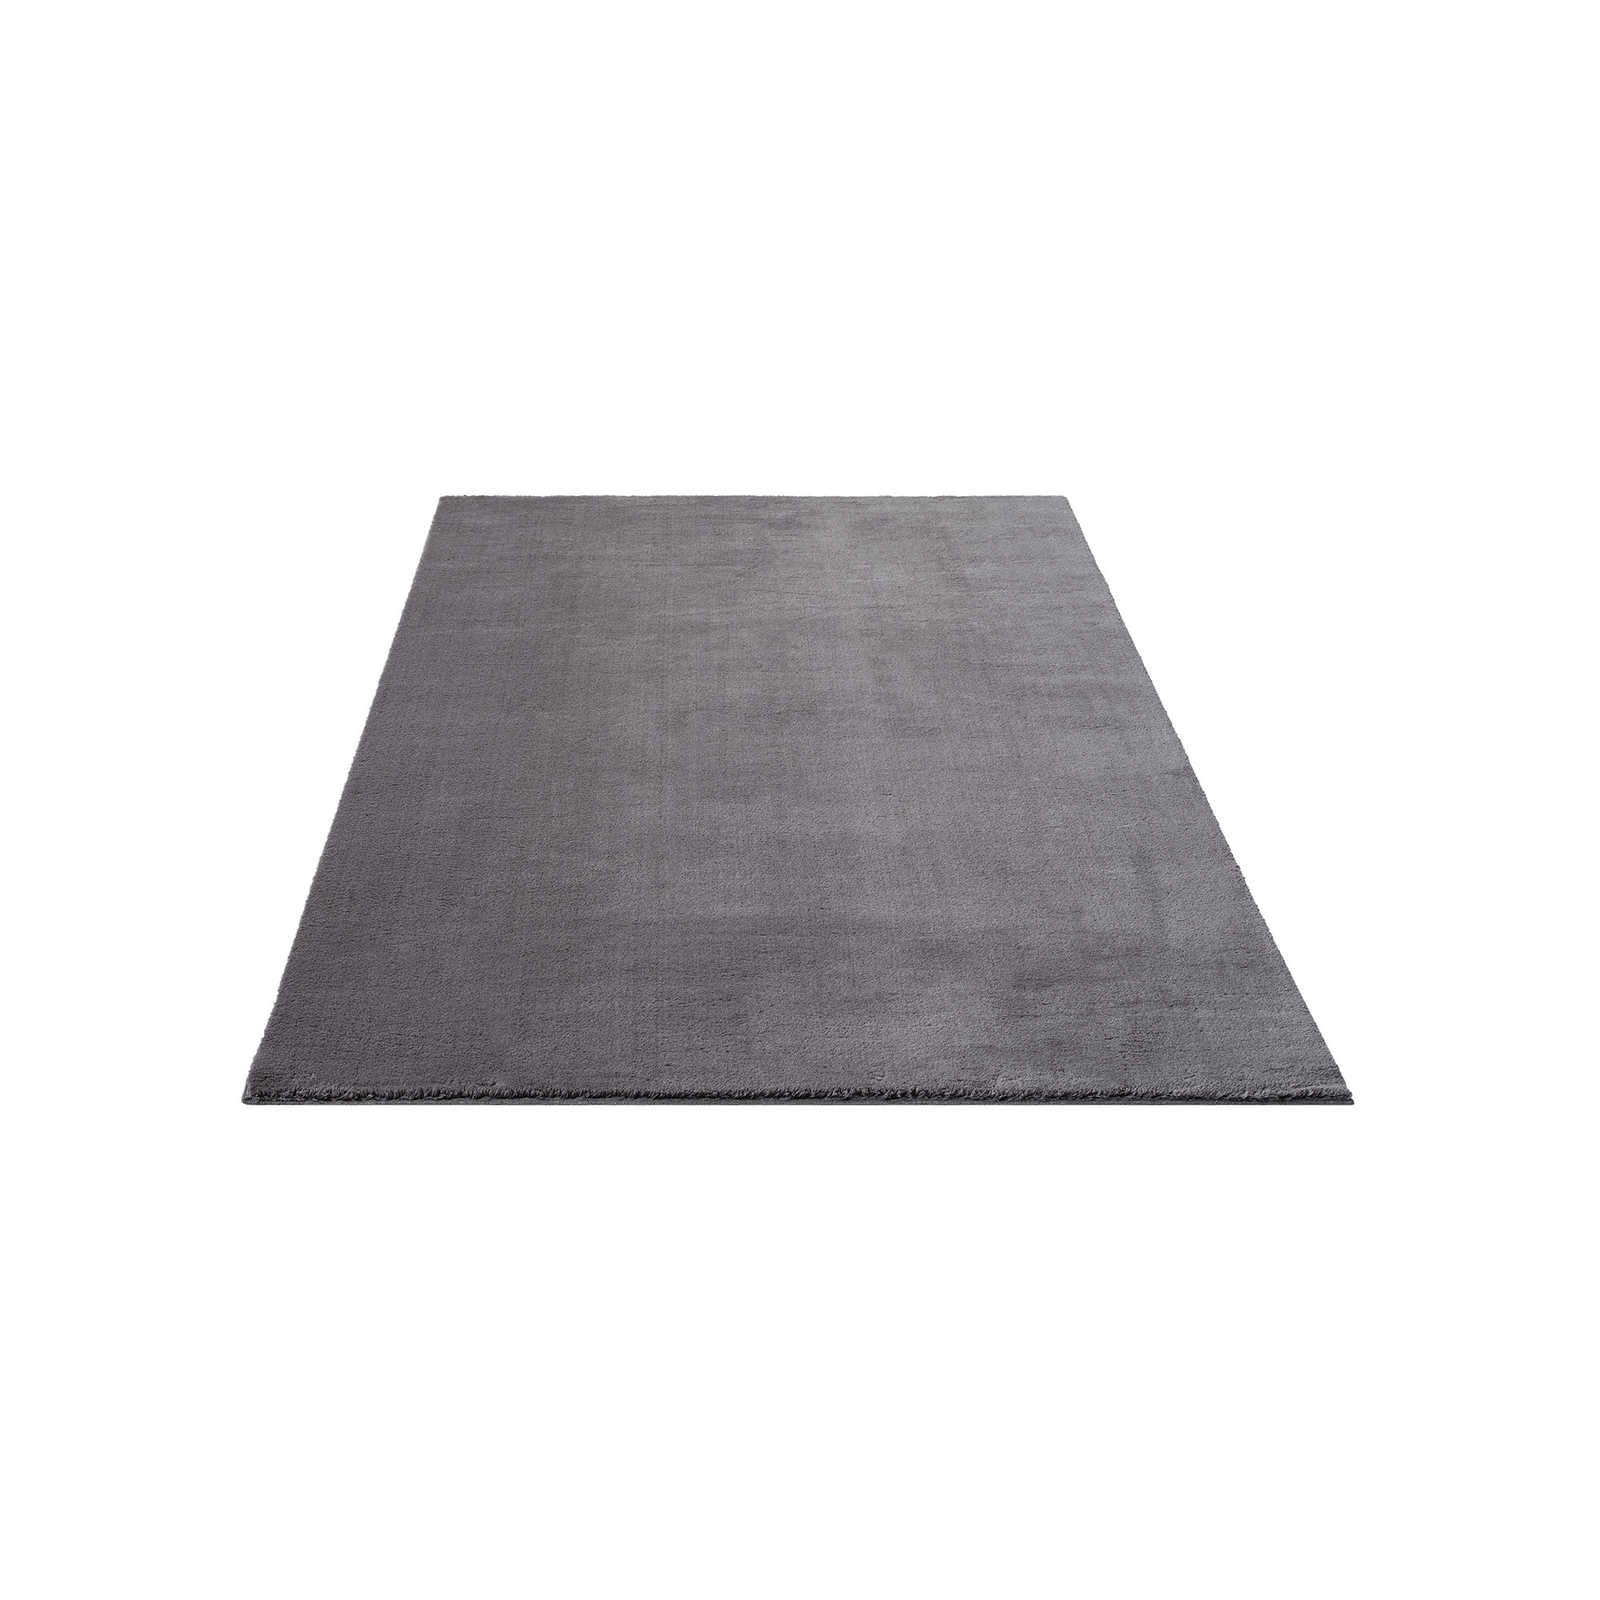 Fluffy high pile carpet in anthracite - 230 x 160 cm
